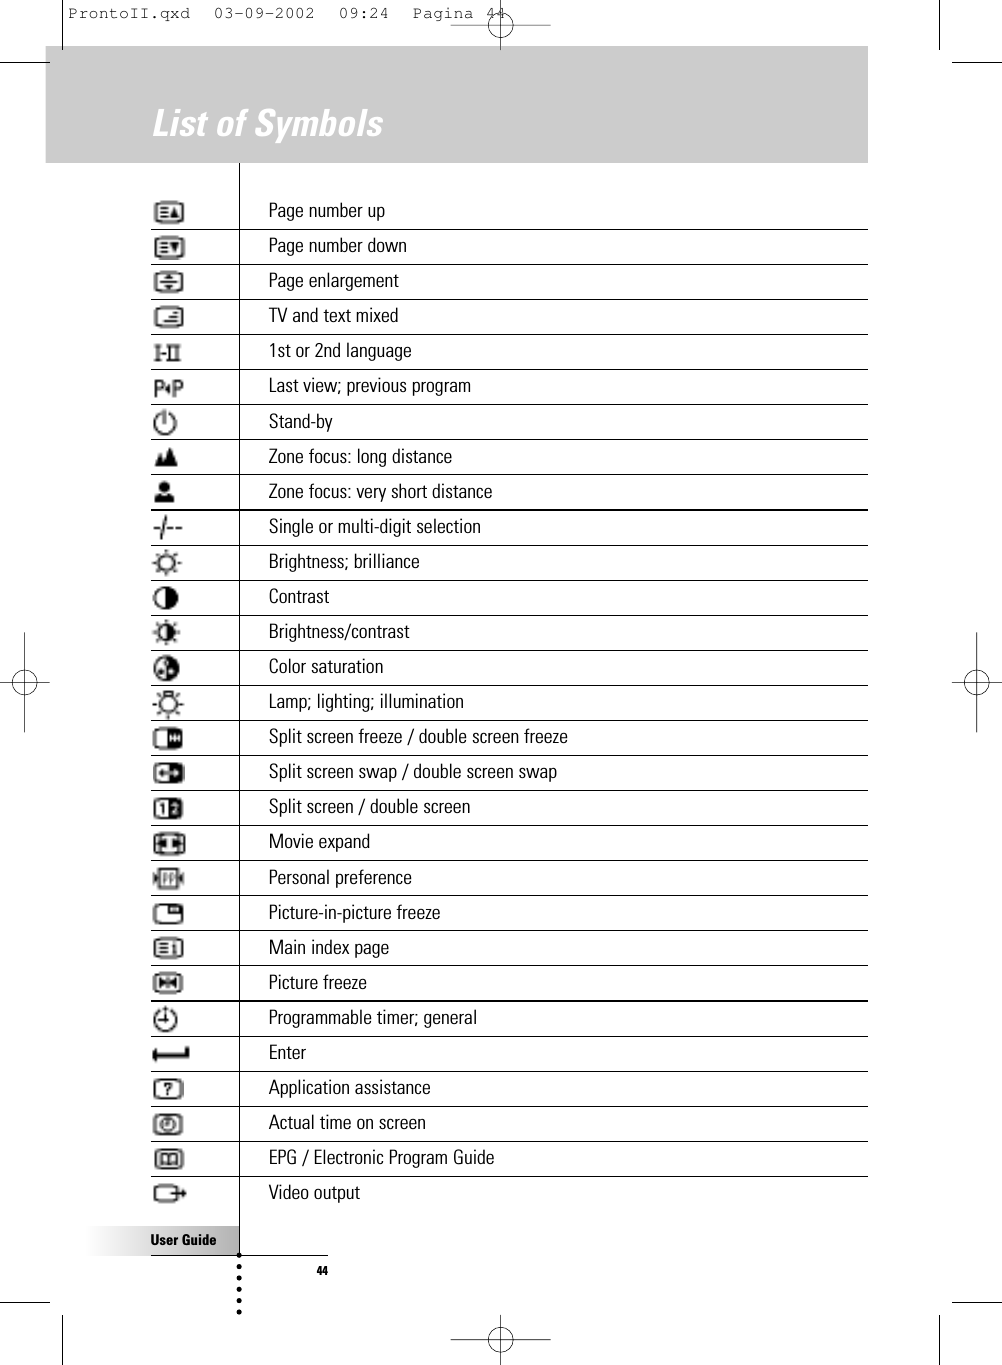 User Guide44List of Symbols Page number upPage number downPage enlargementTV and text mixed1st or 2nd languageLast view; previous programStand-byZone focus: long distanceZone focus: very short distanceSingle or multi-digit selectionBrightness; brillianceContrastBrightness/contrastColor saturationLamp; lighting; illuminationSplit screen freeze / double screen freezeSplit screen swap / double screen swapSplit screen / double screenMovie expandPersonal preferencePicture-in-picture freezeMain index pagePicture freezeProgrammable timer; generalEnterApplication assistanceActual time on screenEPG / Electronic Program GuideVideo outputProntoII.qxd  03-09-2002  09:24  Pagina 44